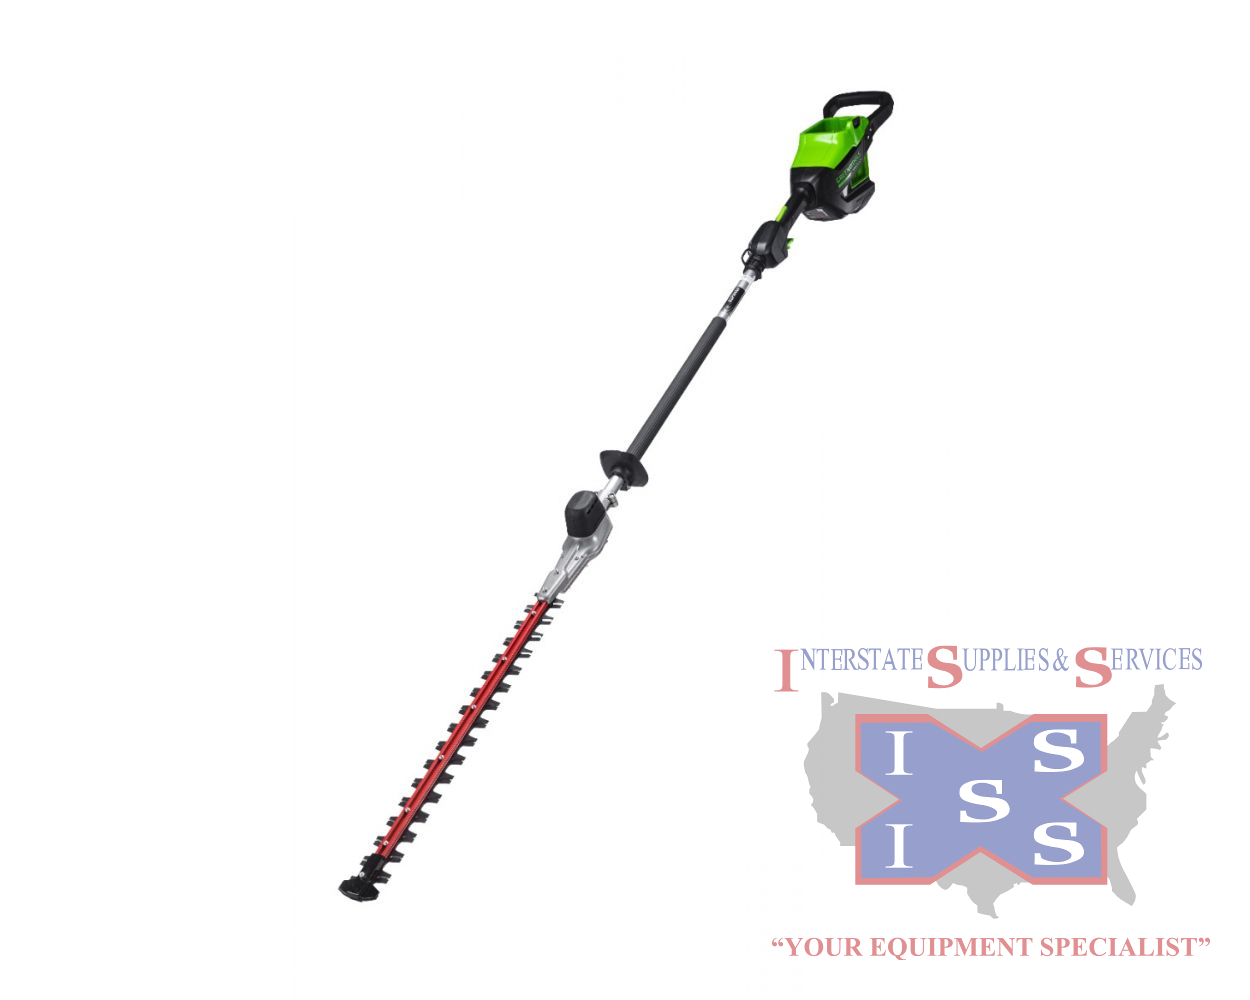 82PH40F 82 Volt Gen II Fixed Mid Pole Hedge Trimmer (Tool Only)